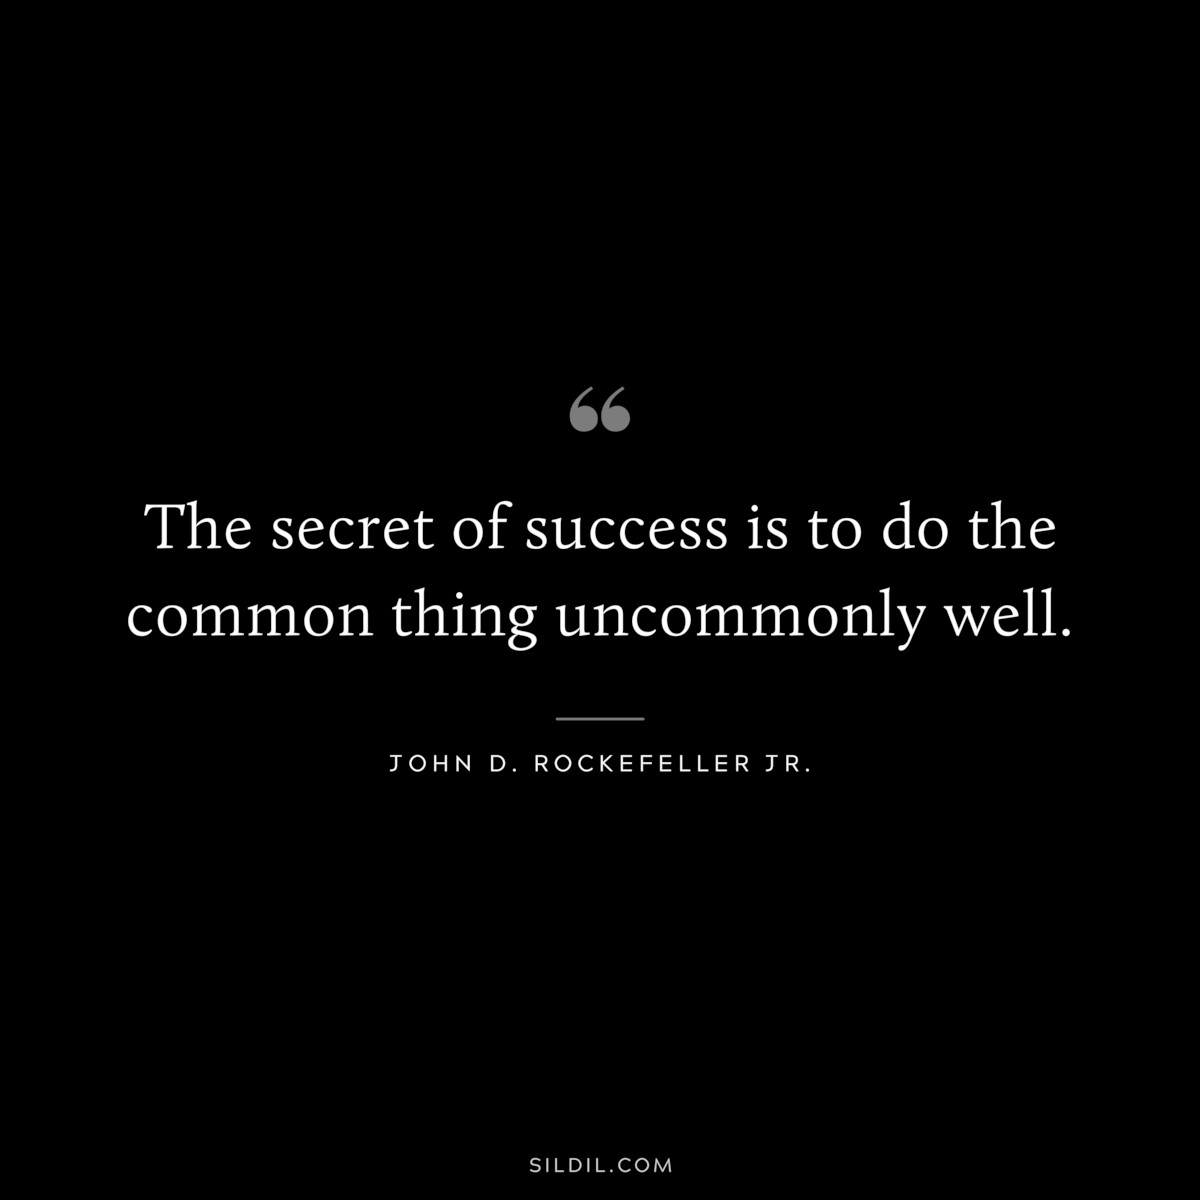 The secret of success is to do the common thing uncommonly well. ― John D. Rockefeller Jr.